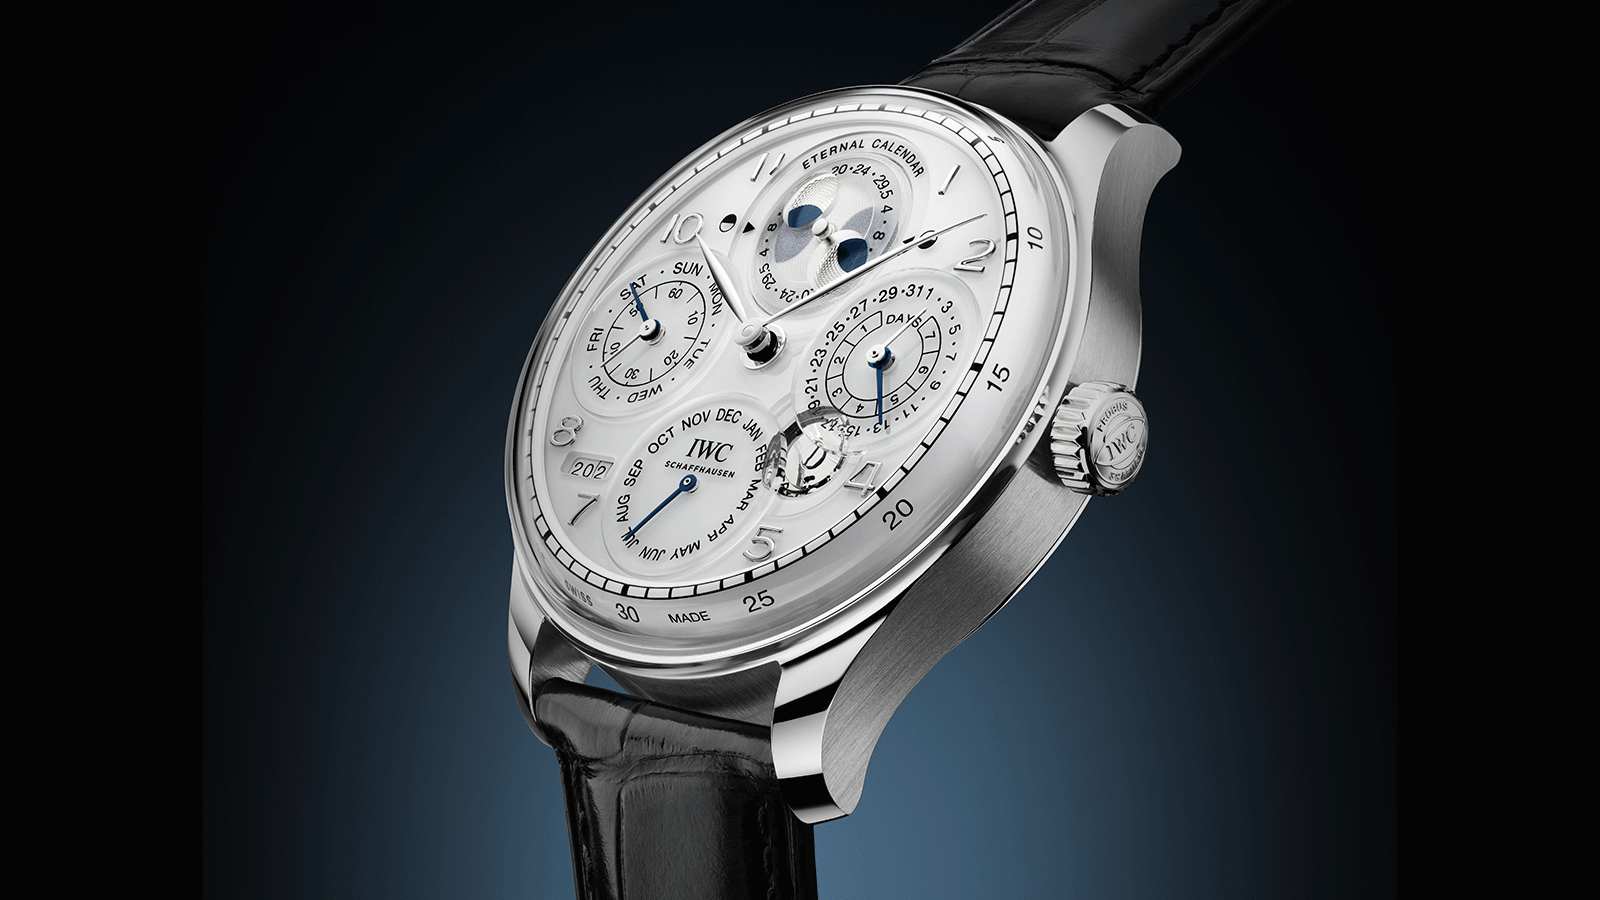 The Portugieser Eternal Calendar is based on the same modular and synchronised design as the existing perpetual calendar. All its displays can be advanced using the crown.